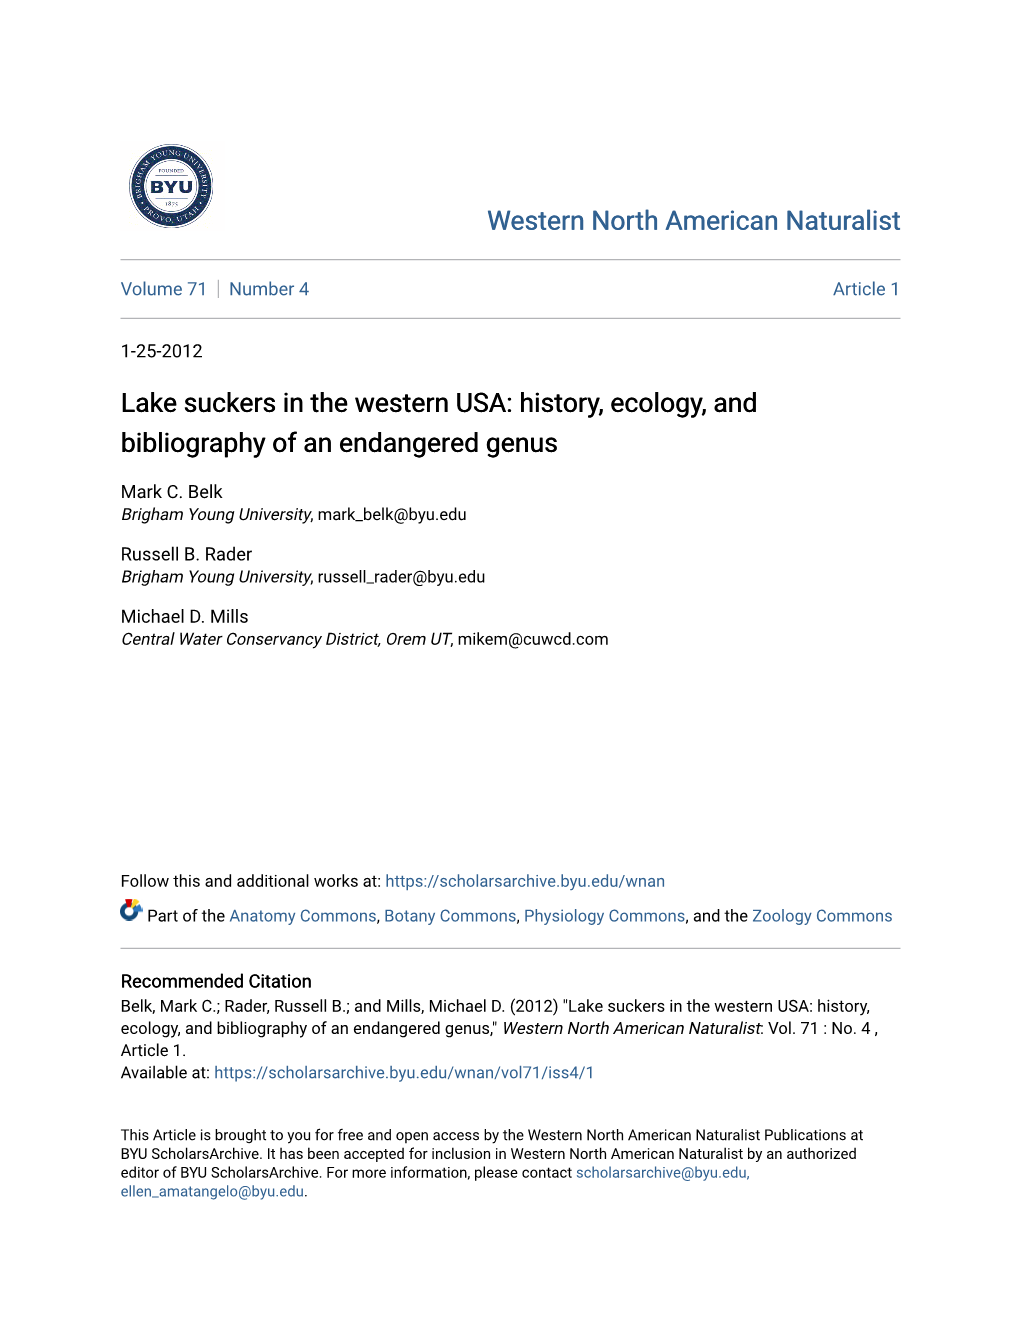 Lake Suckers in the Western USA: History, Ecology, and Bibliography of an Endangered Genus